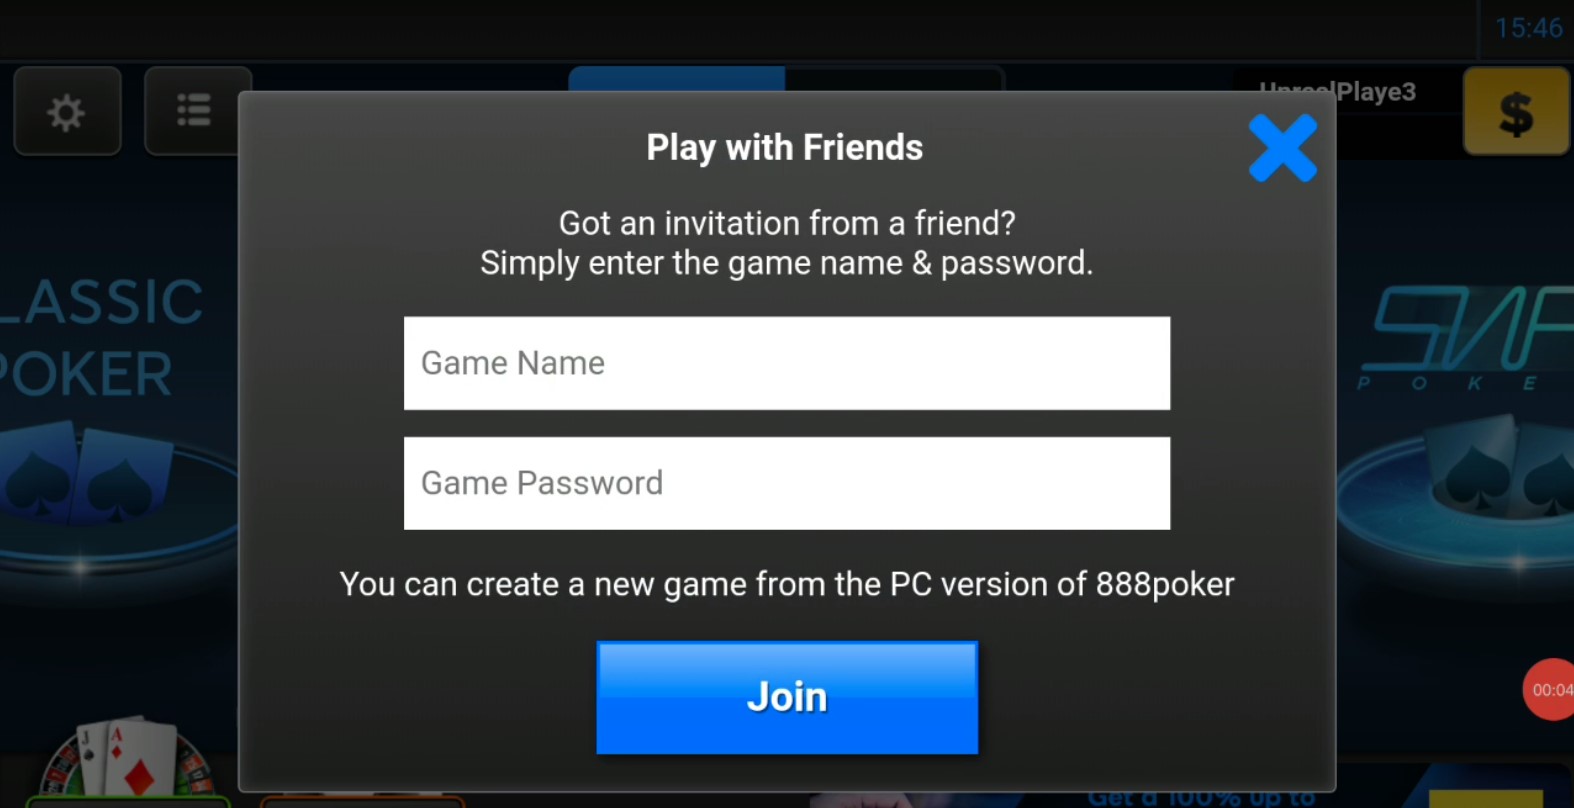 Enter the Game Name and Game Password in the popup screen